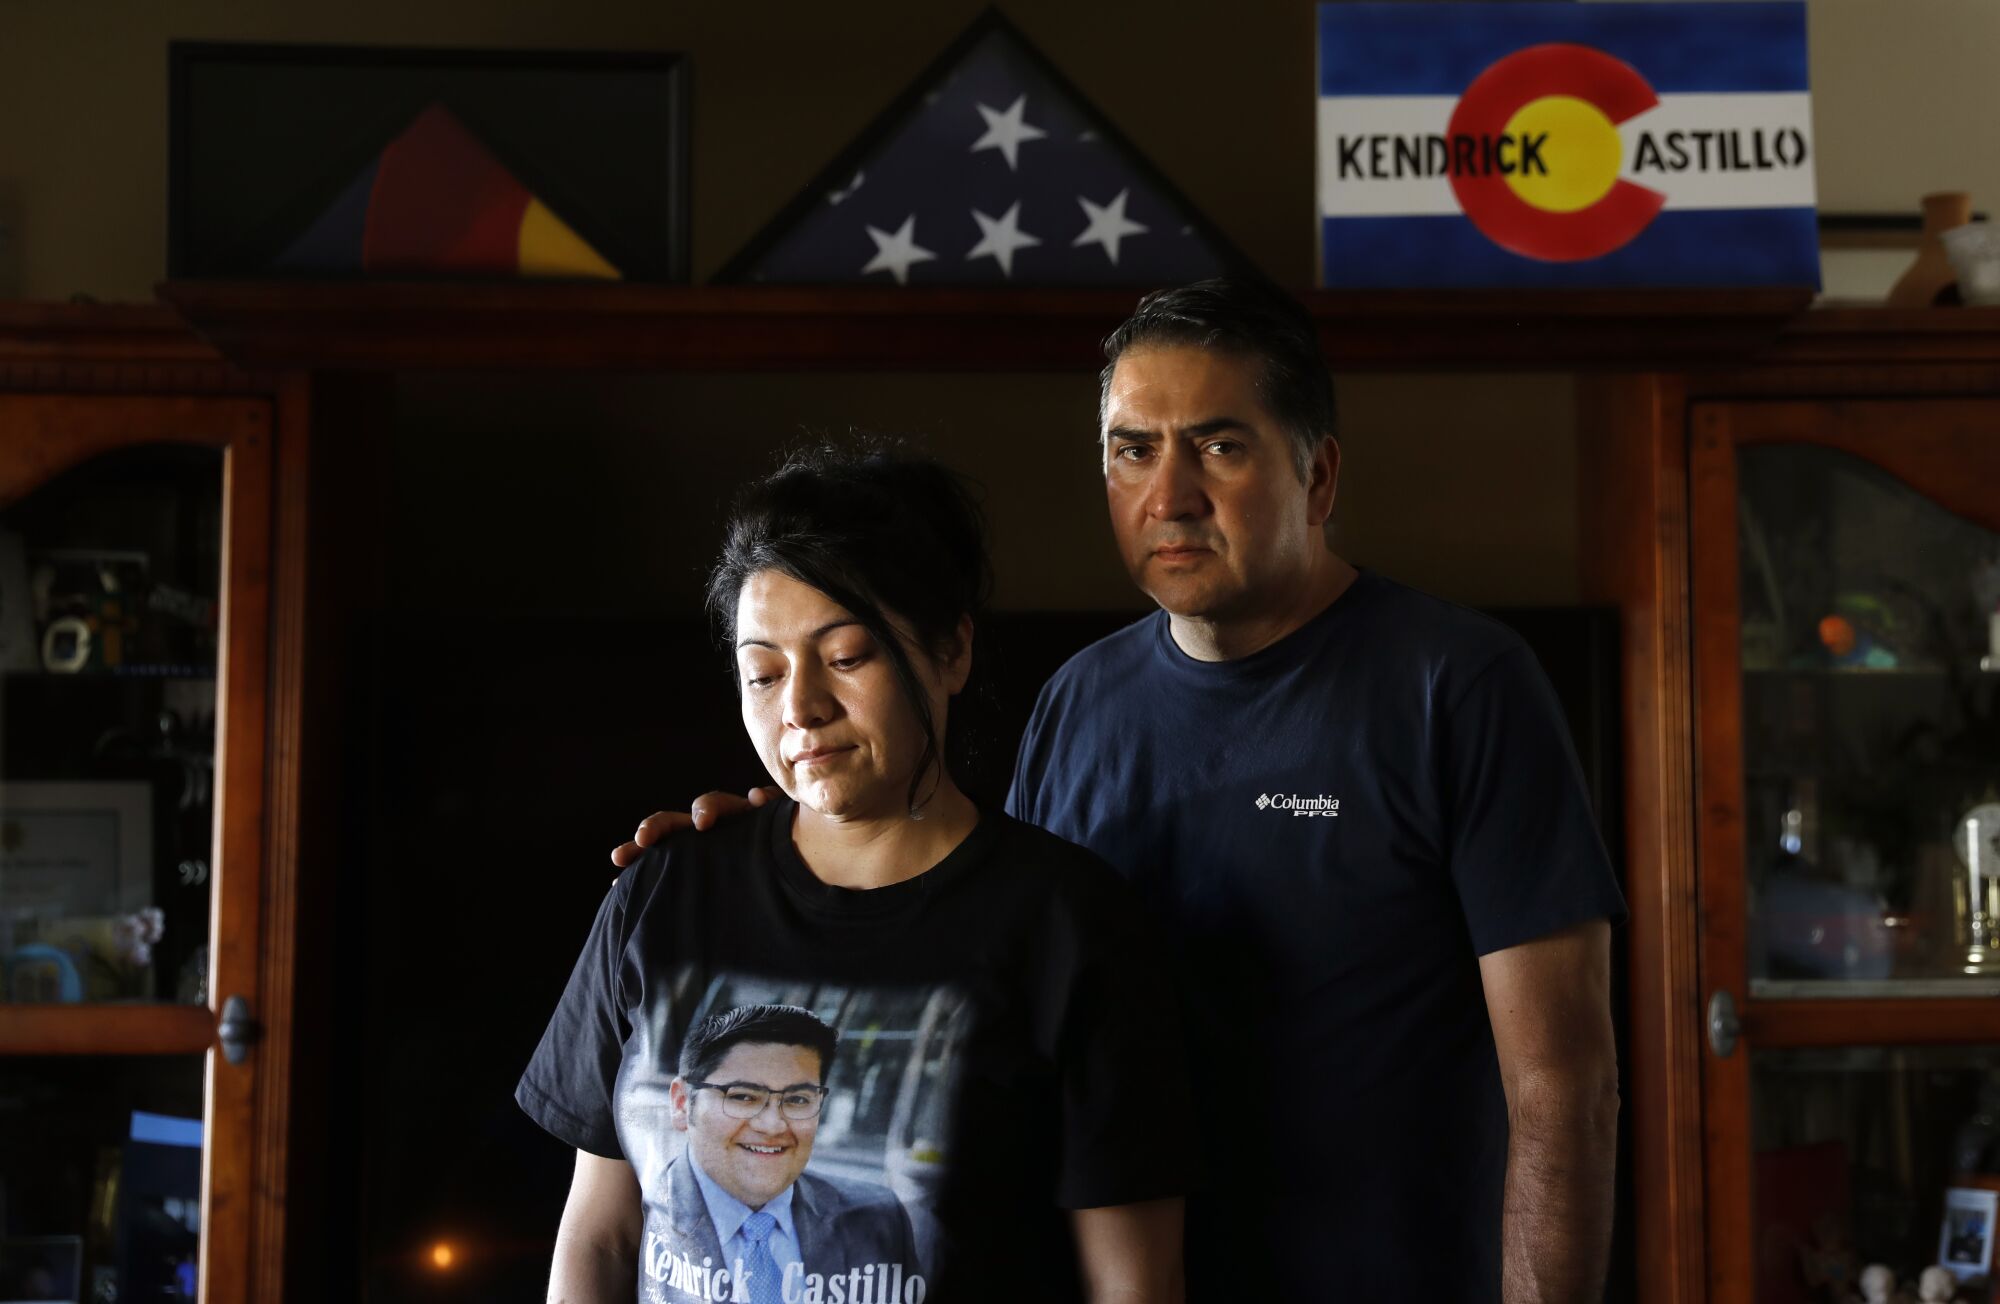 Kendrick Castillo's parents, Maria and John Castillo, at their home in Denver. Their son was killed in May after charging a gunman at school.